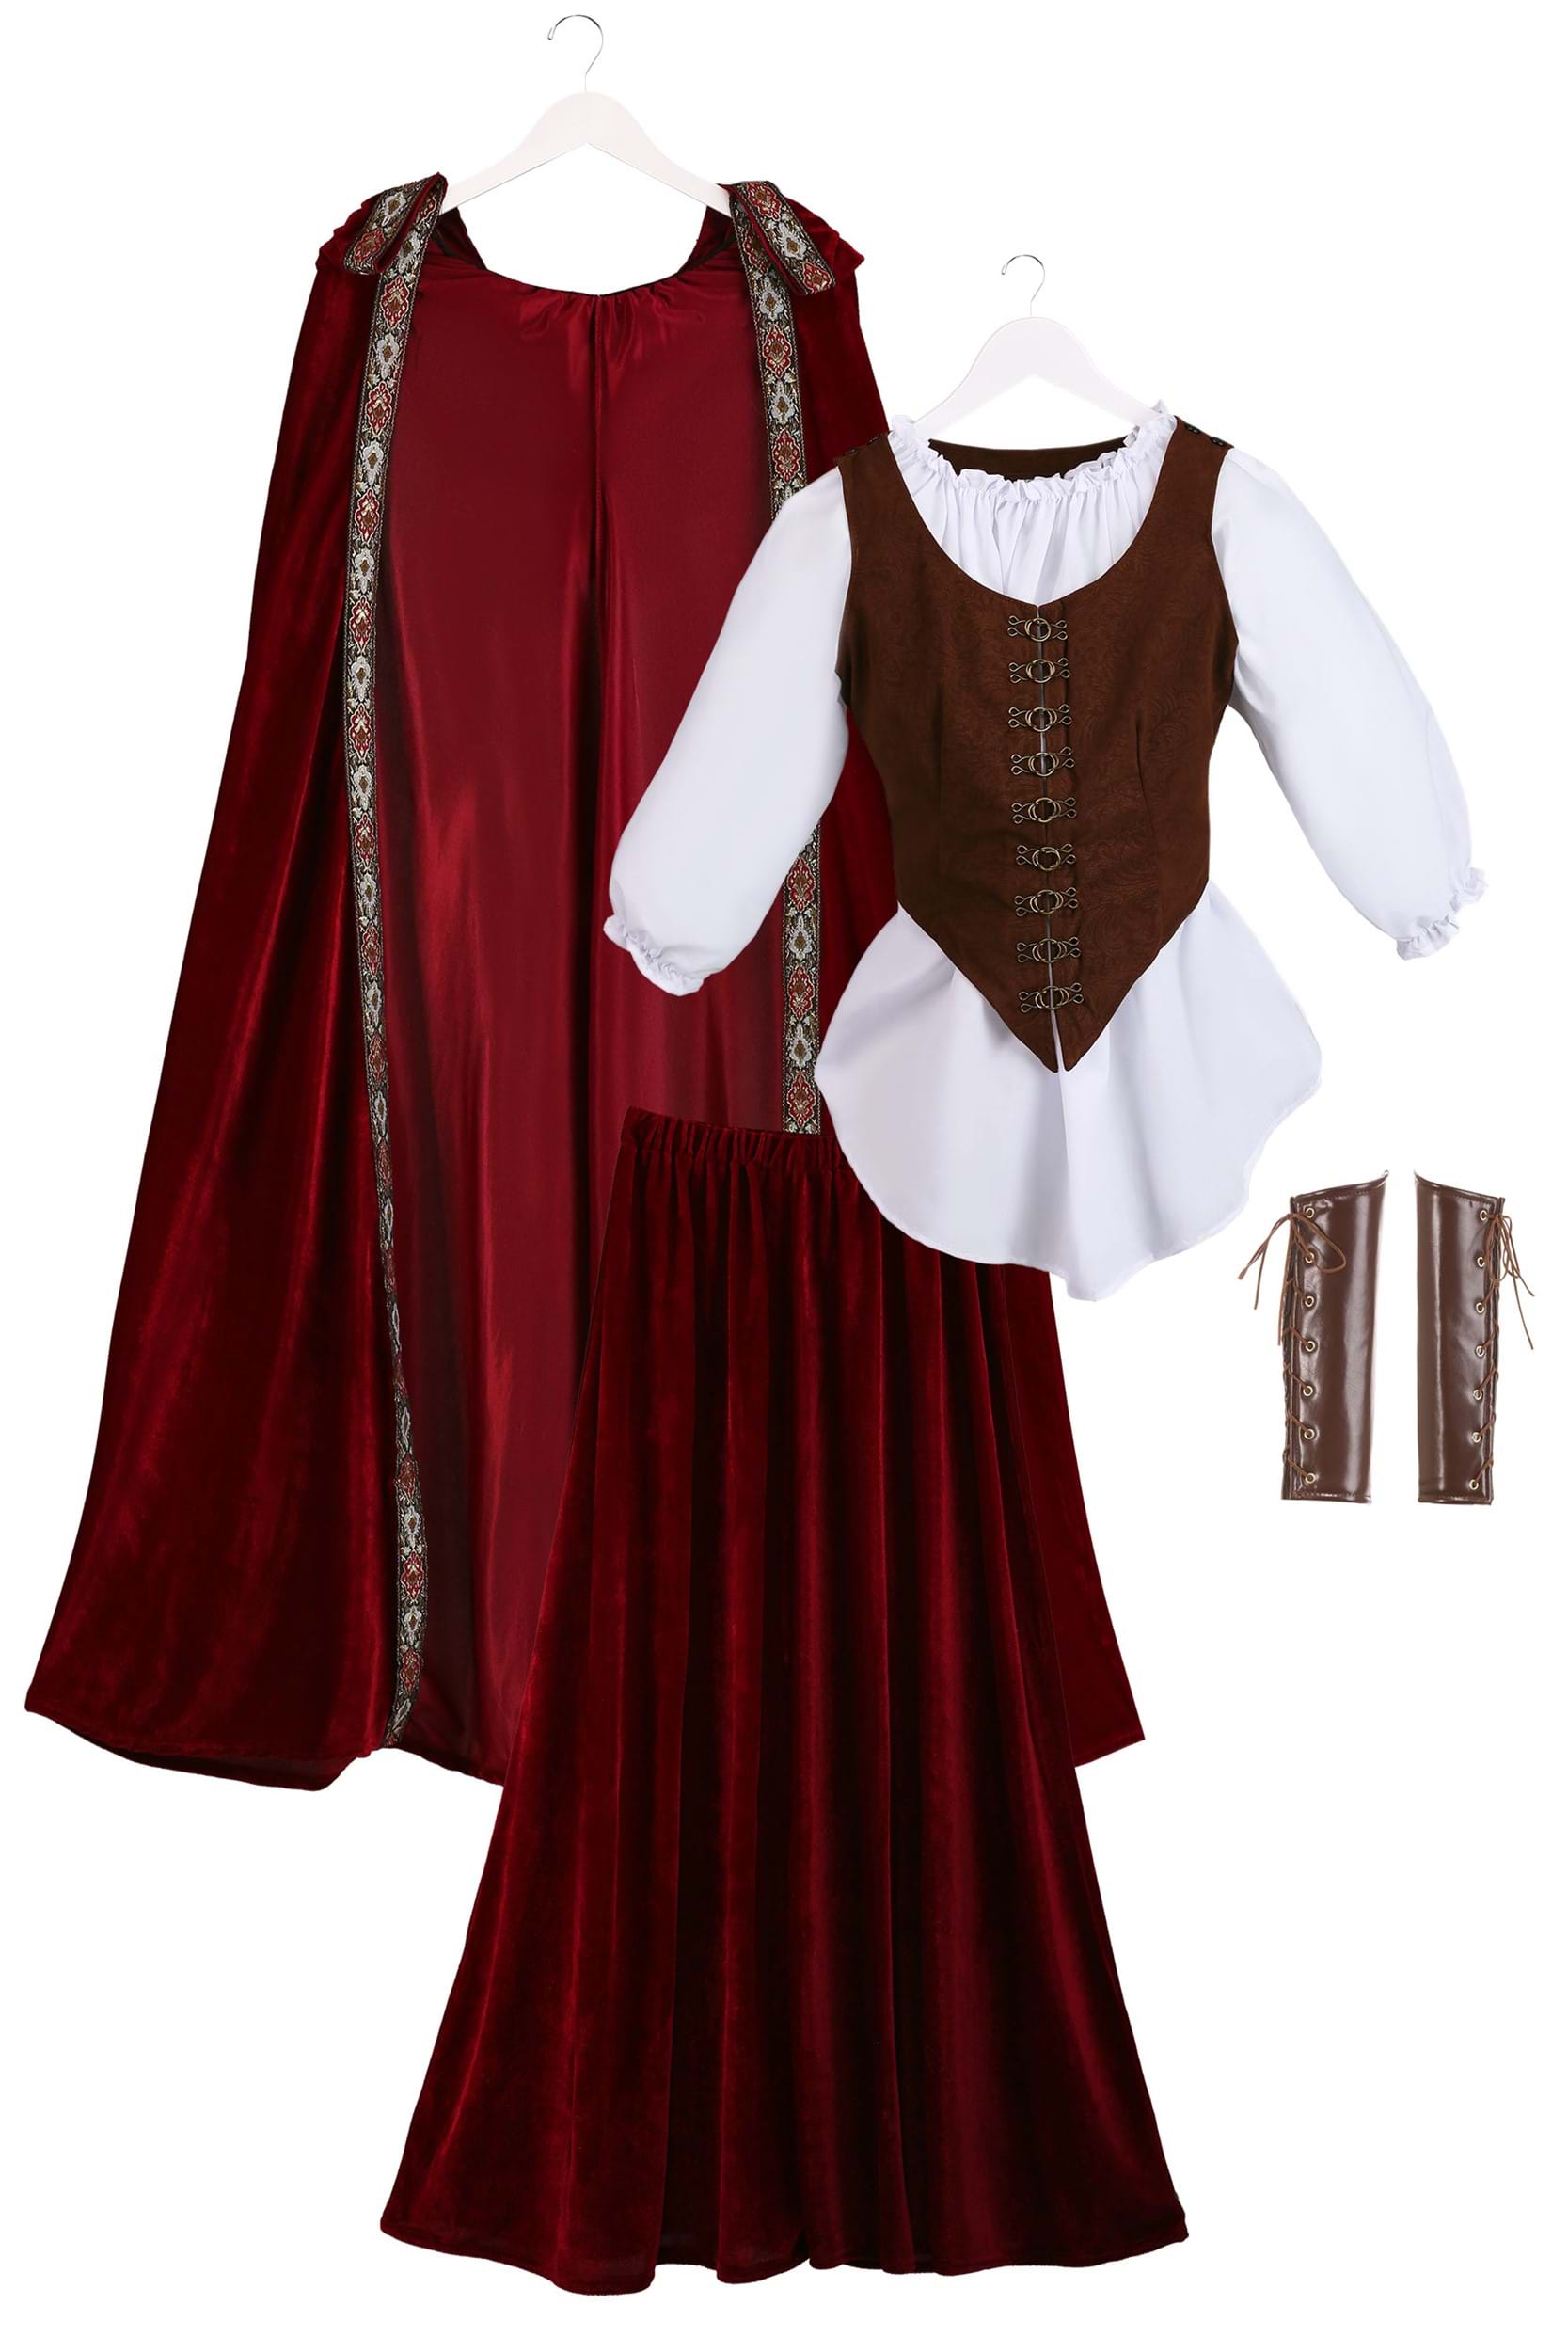 Deluxe Red Riding Hood Costume For Women